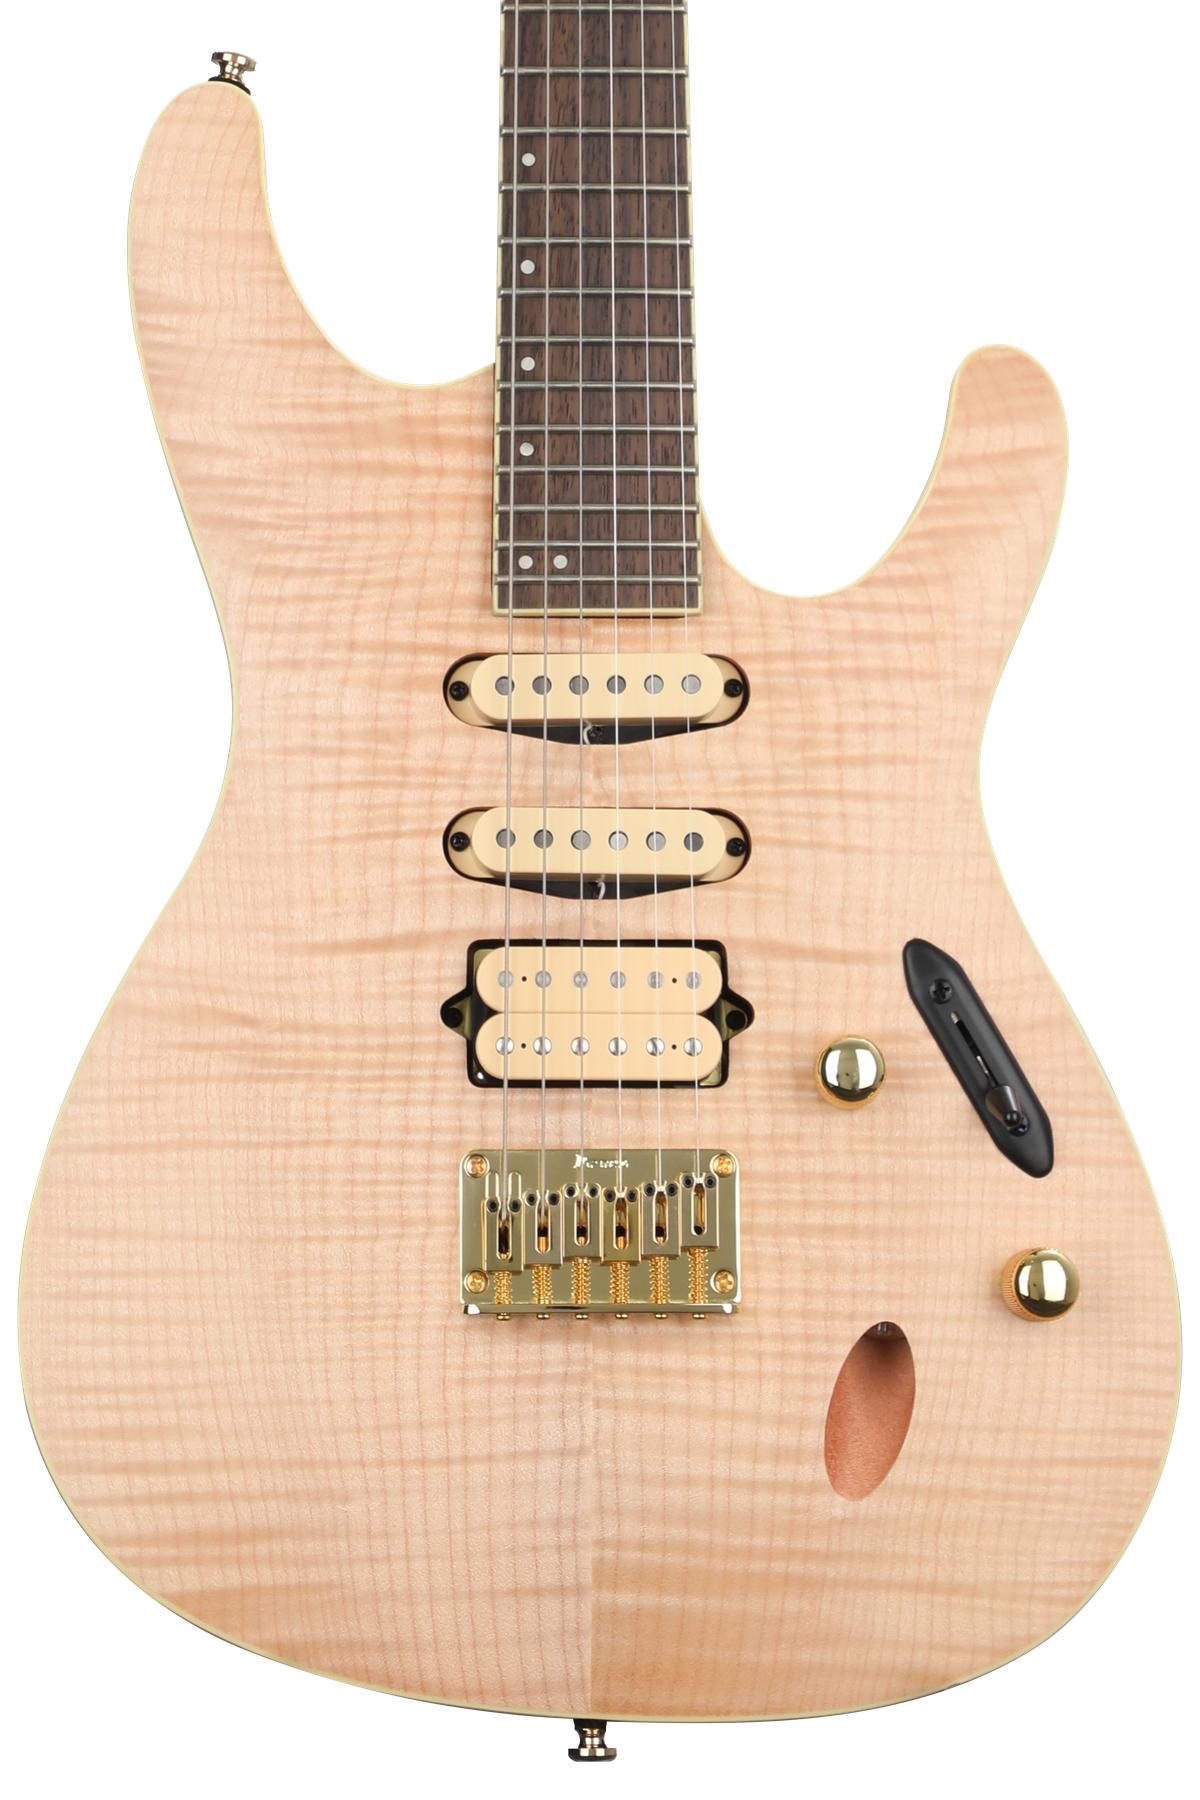 Ibanez Standard SEW761FM Electric Guitar - Natural Flat | Sweetwater